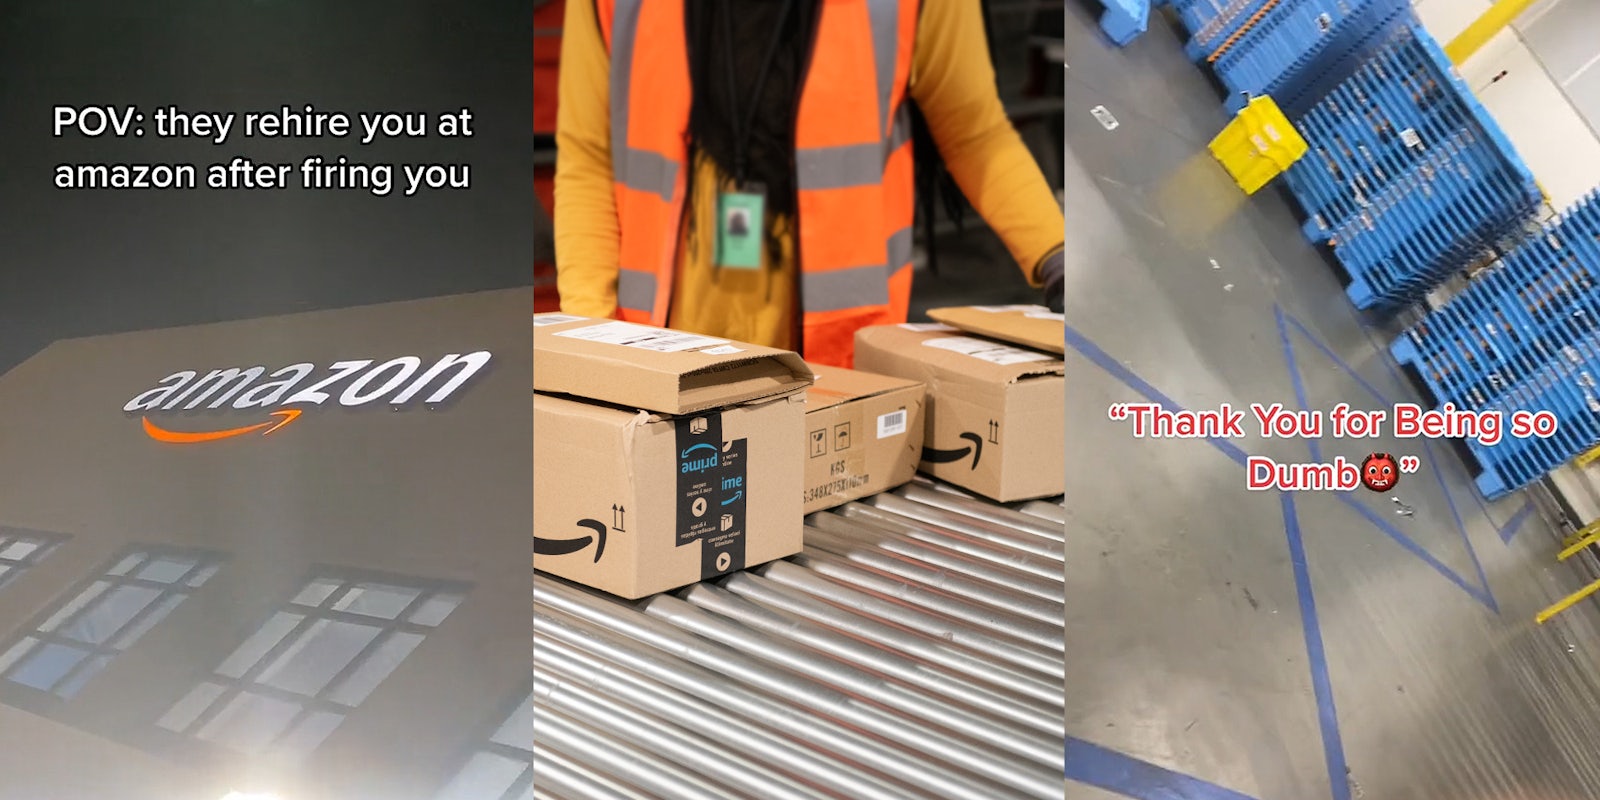 exterior of Amazon building with logo caption 'POV: they rehire you at amazon after firing you' (l) Amazon worker with hand on boxes (c) Amazon building interior caption ''Thank you for being so dumb'' (r)